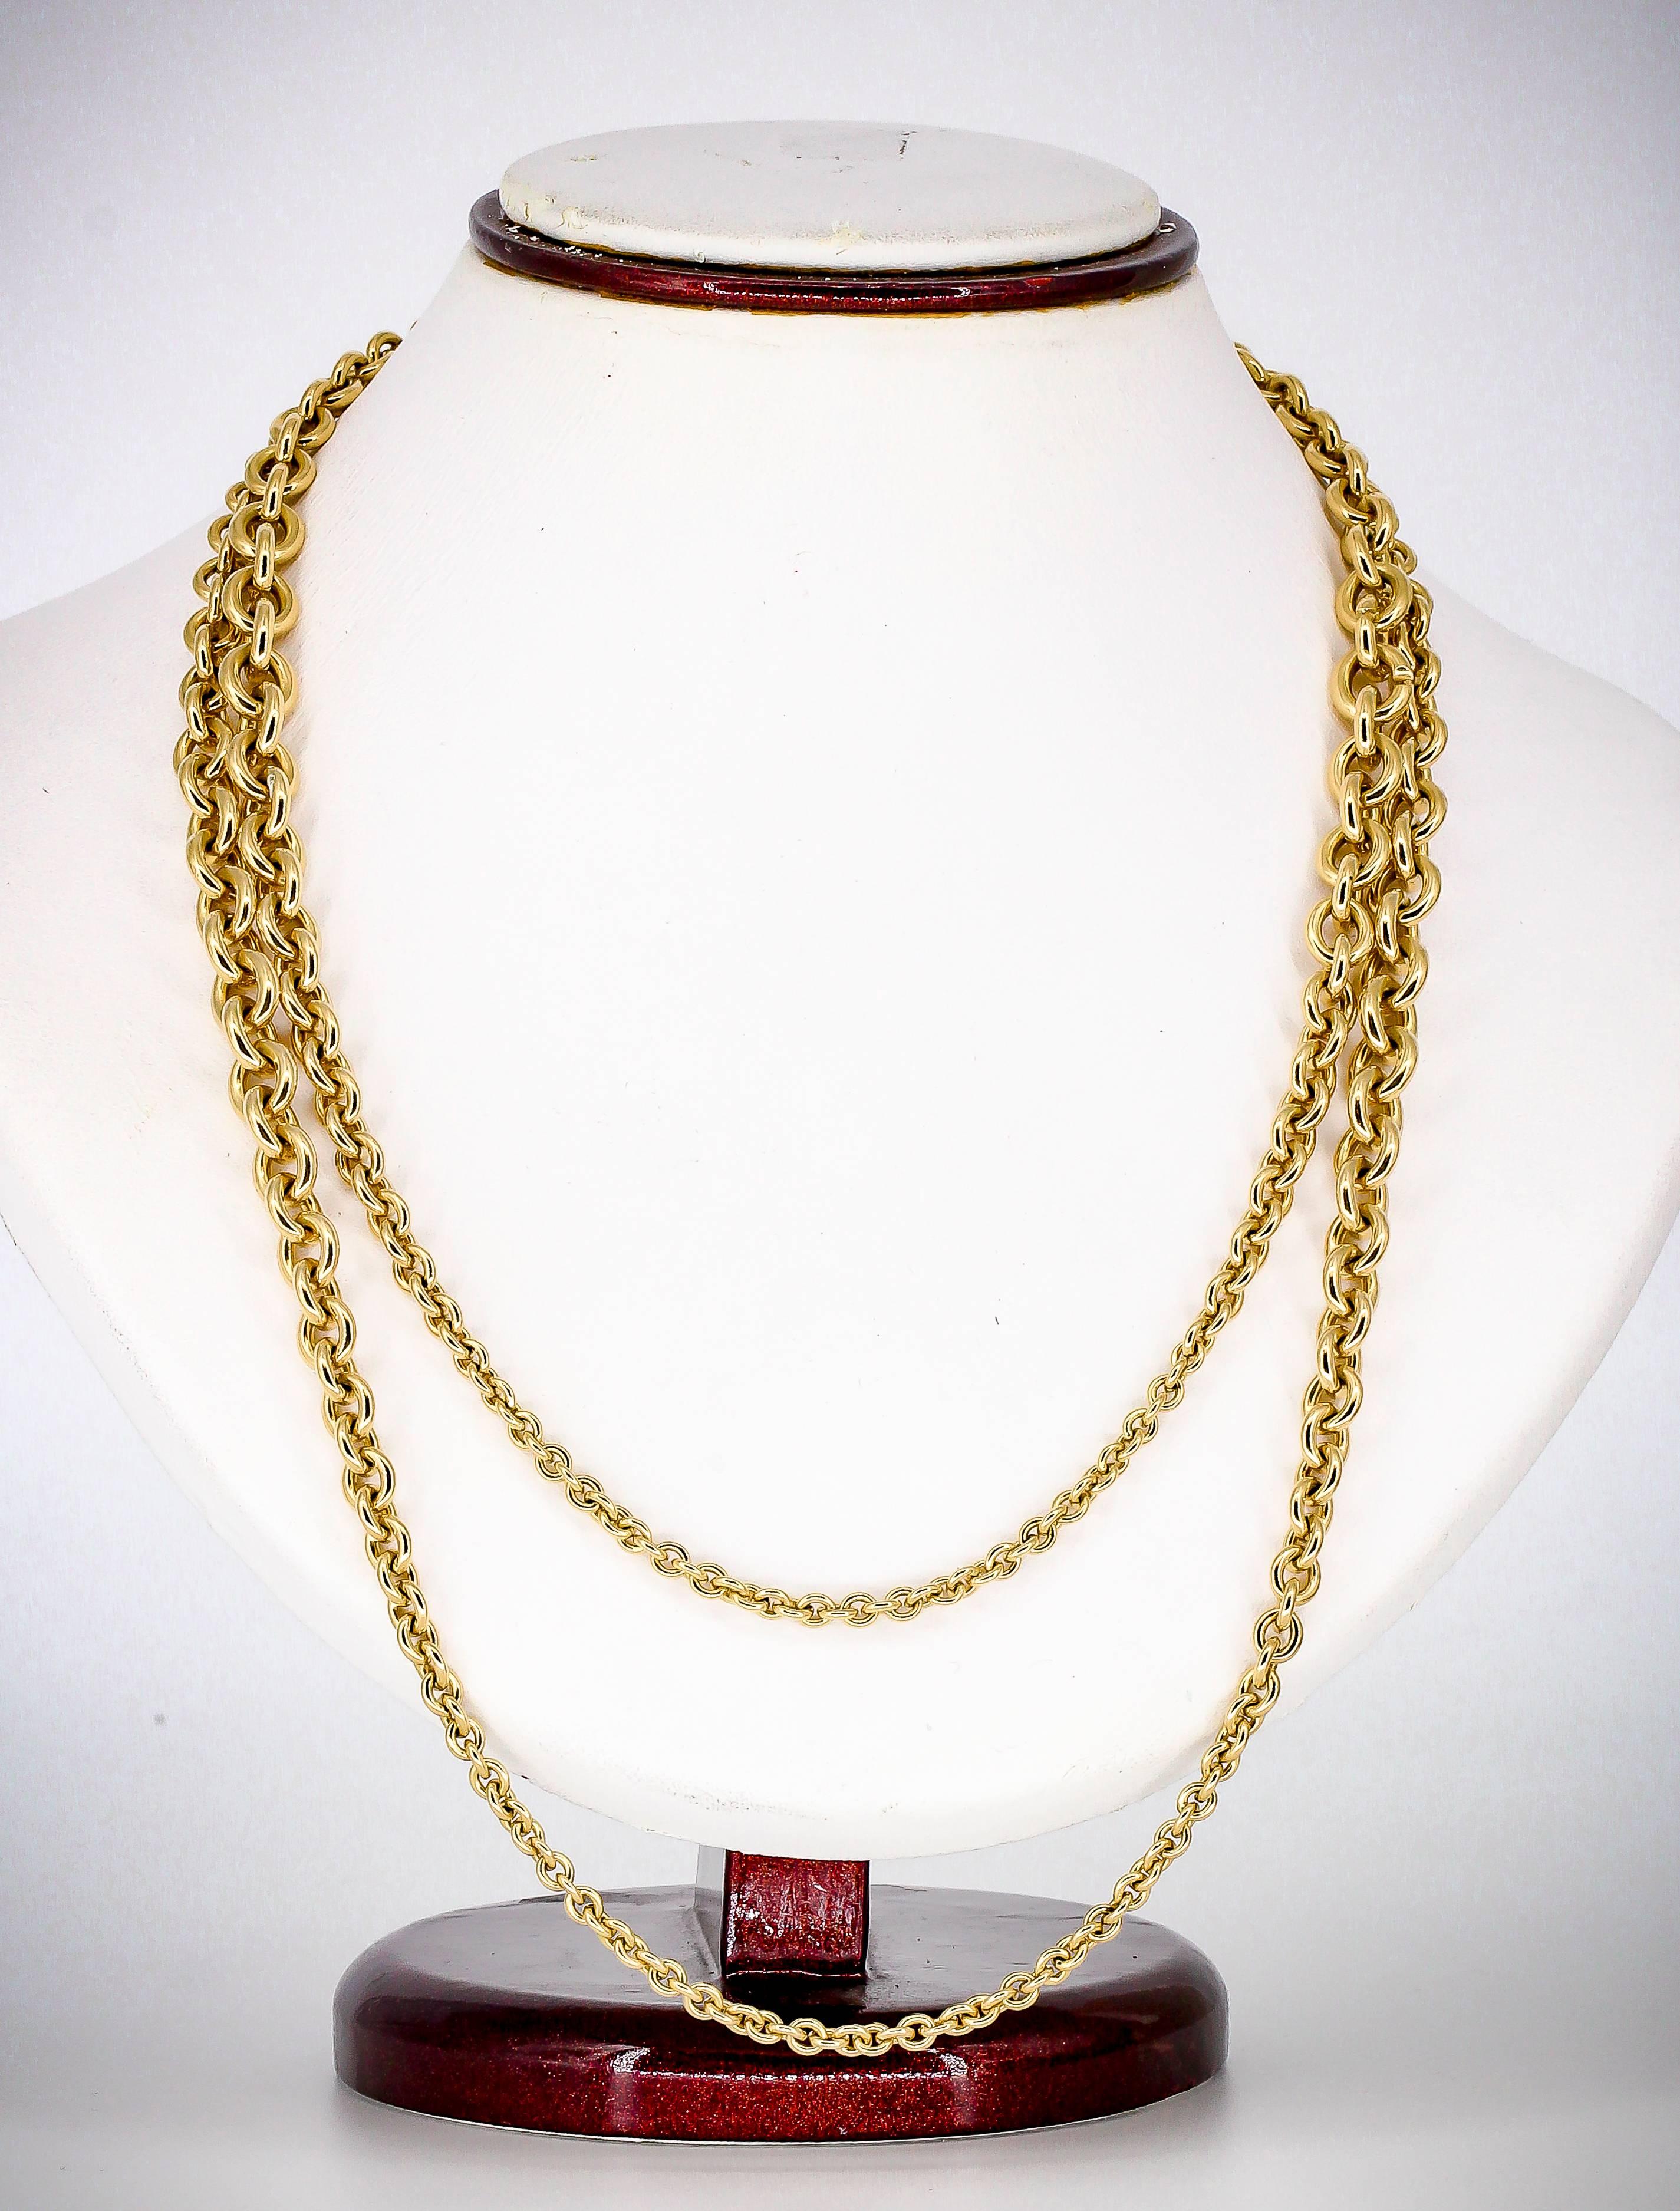 Timeless 18K yellow gold chain necklace by Hermes. It features several sections of graduating links and is approx. 40 inches long. Beautifully made and easy to wear as a long chain or doubled up as a shorter one.

Hallmarks: Hermes, Au750, reference